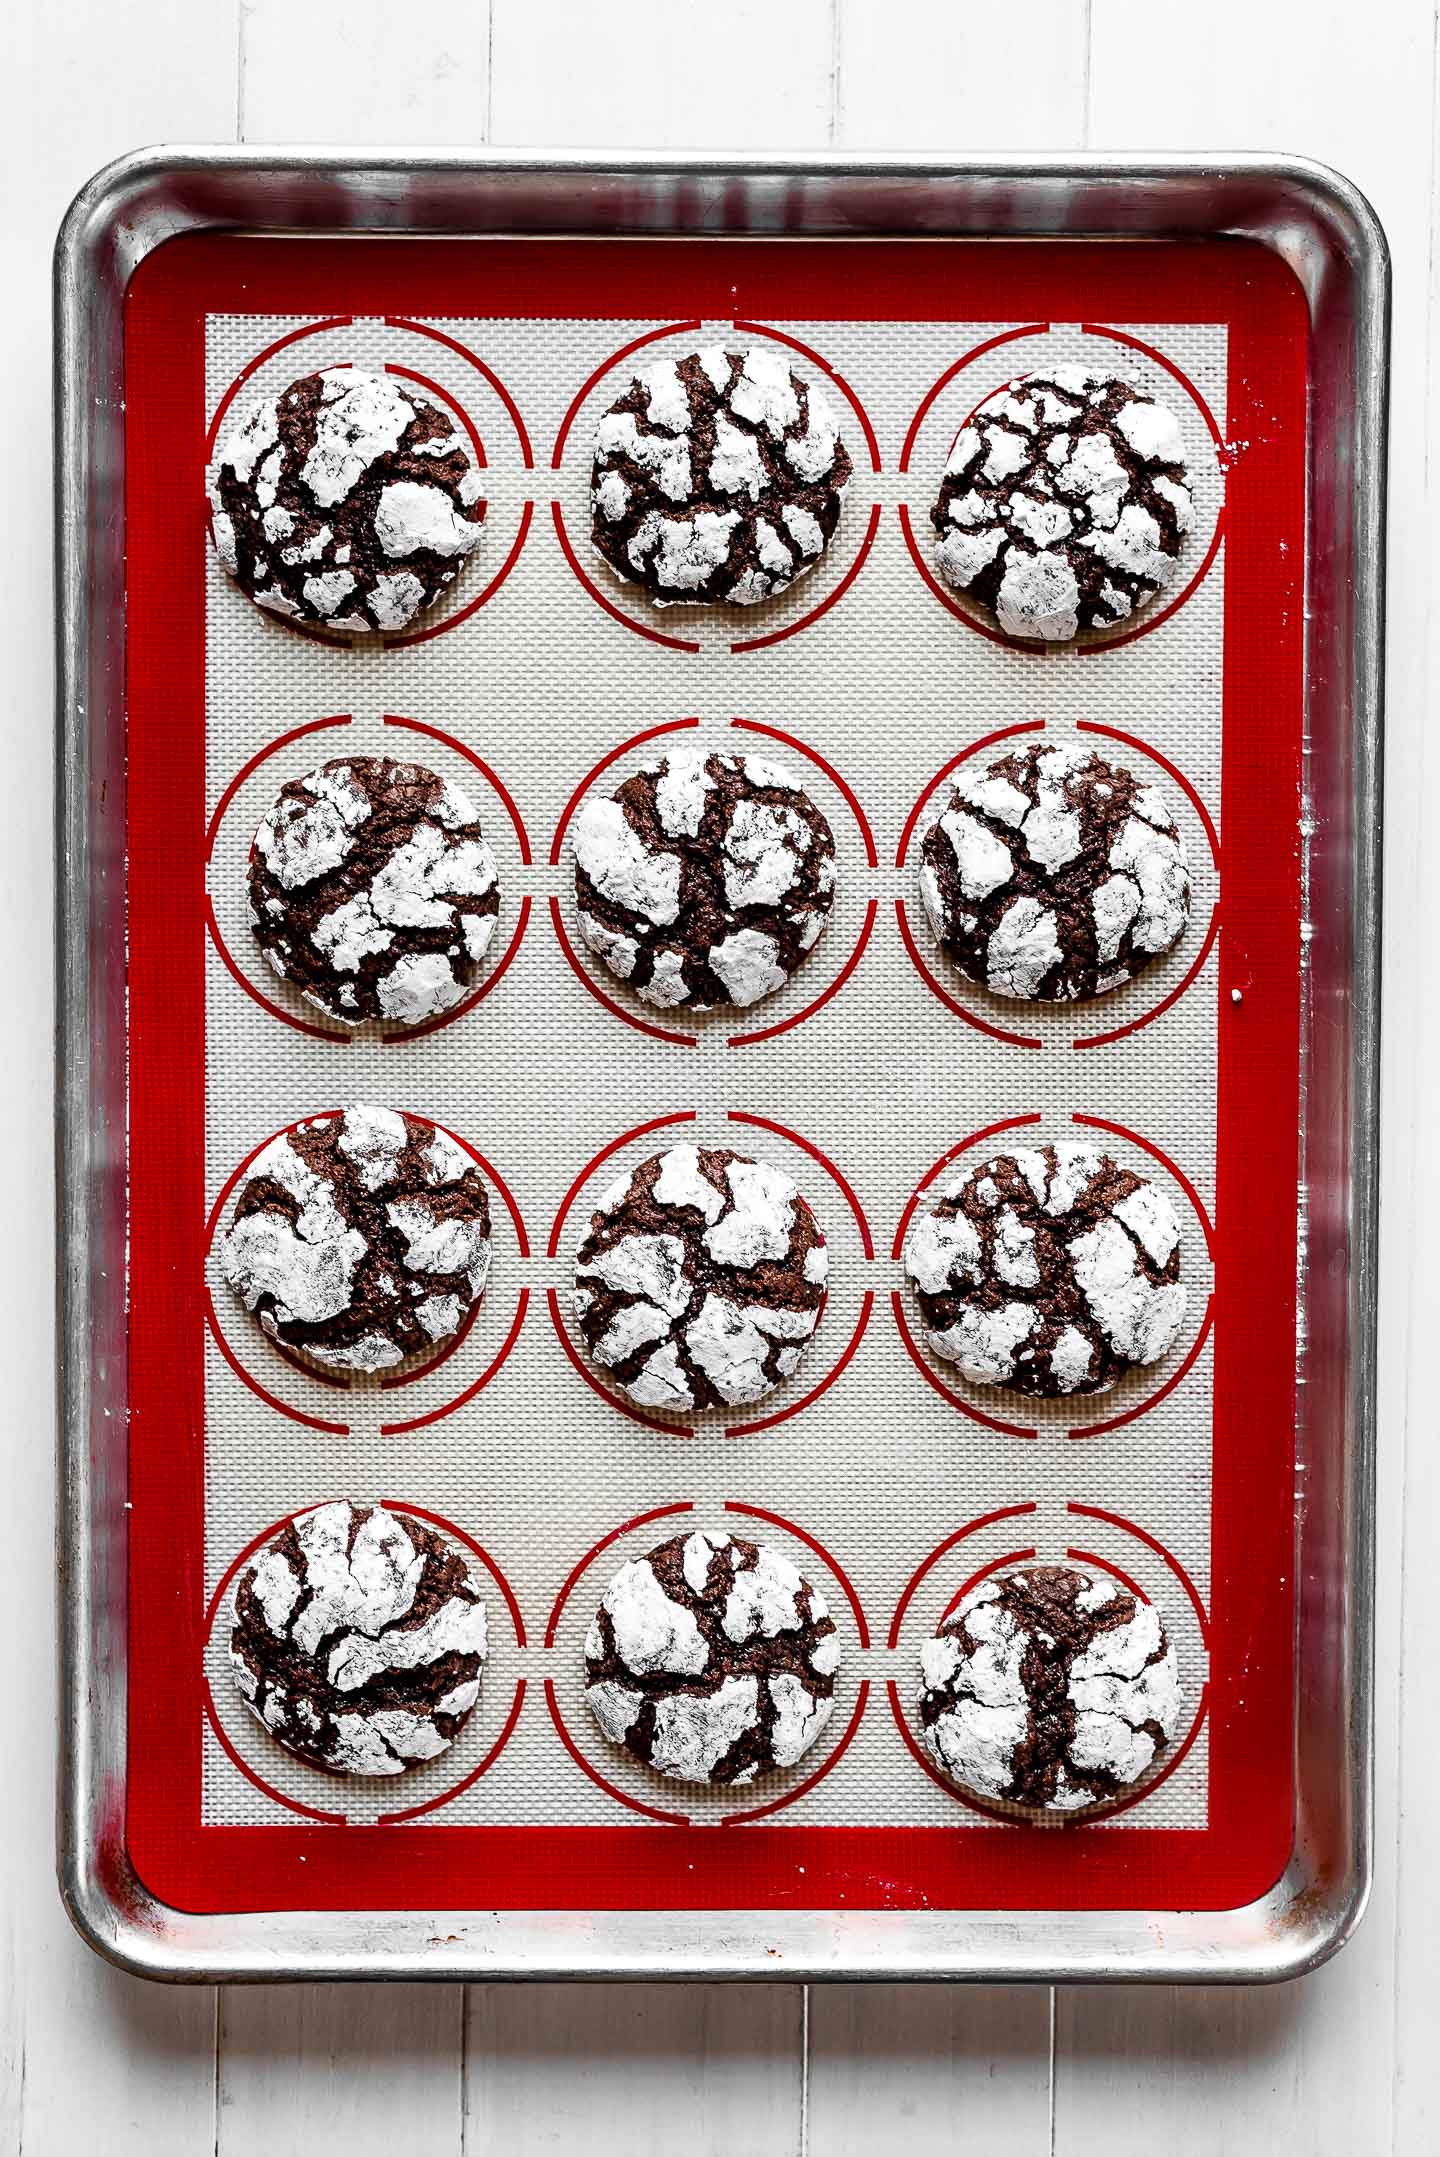 Chocolate Crinkle Cookies on a red silpat lined baking sheet.